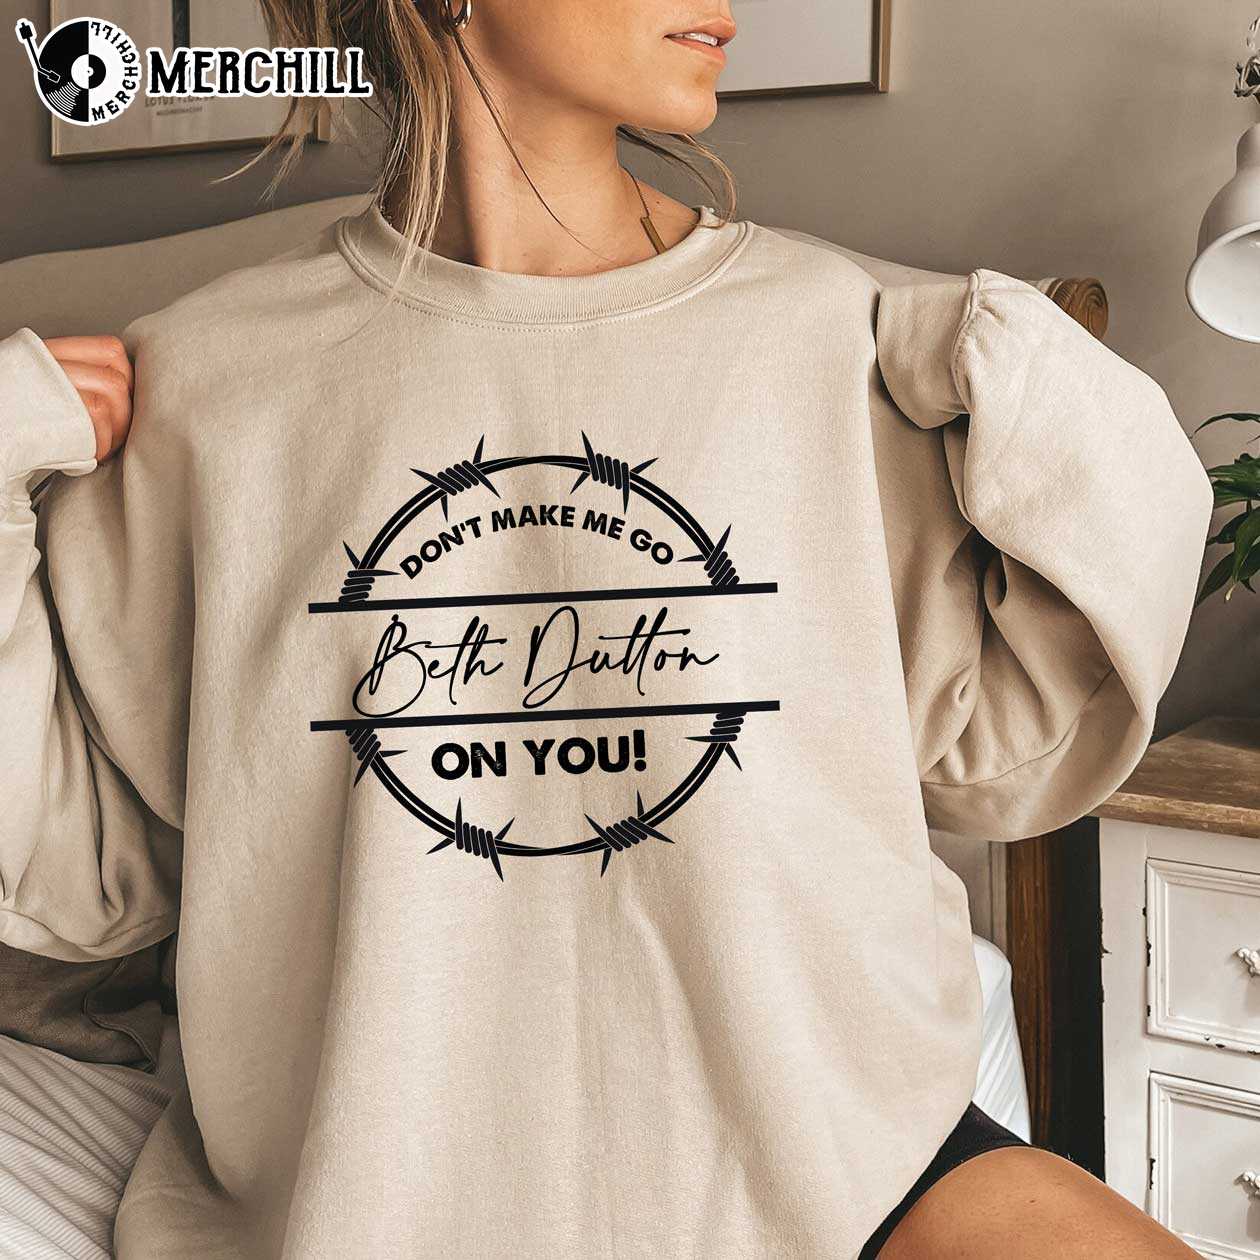 Don't Make Me Go Beth Dutton On You Yellowstone Shirt Beth Dutton - Happy  Place for Music Lovers